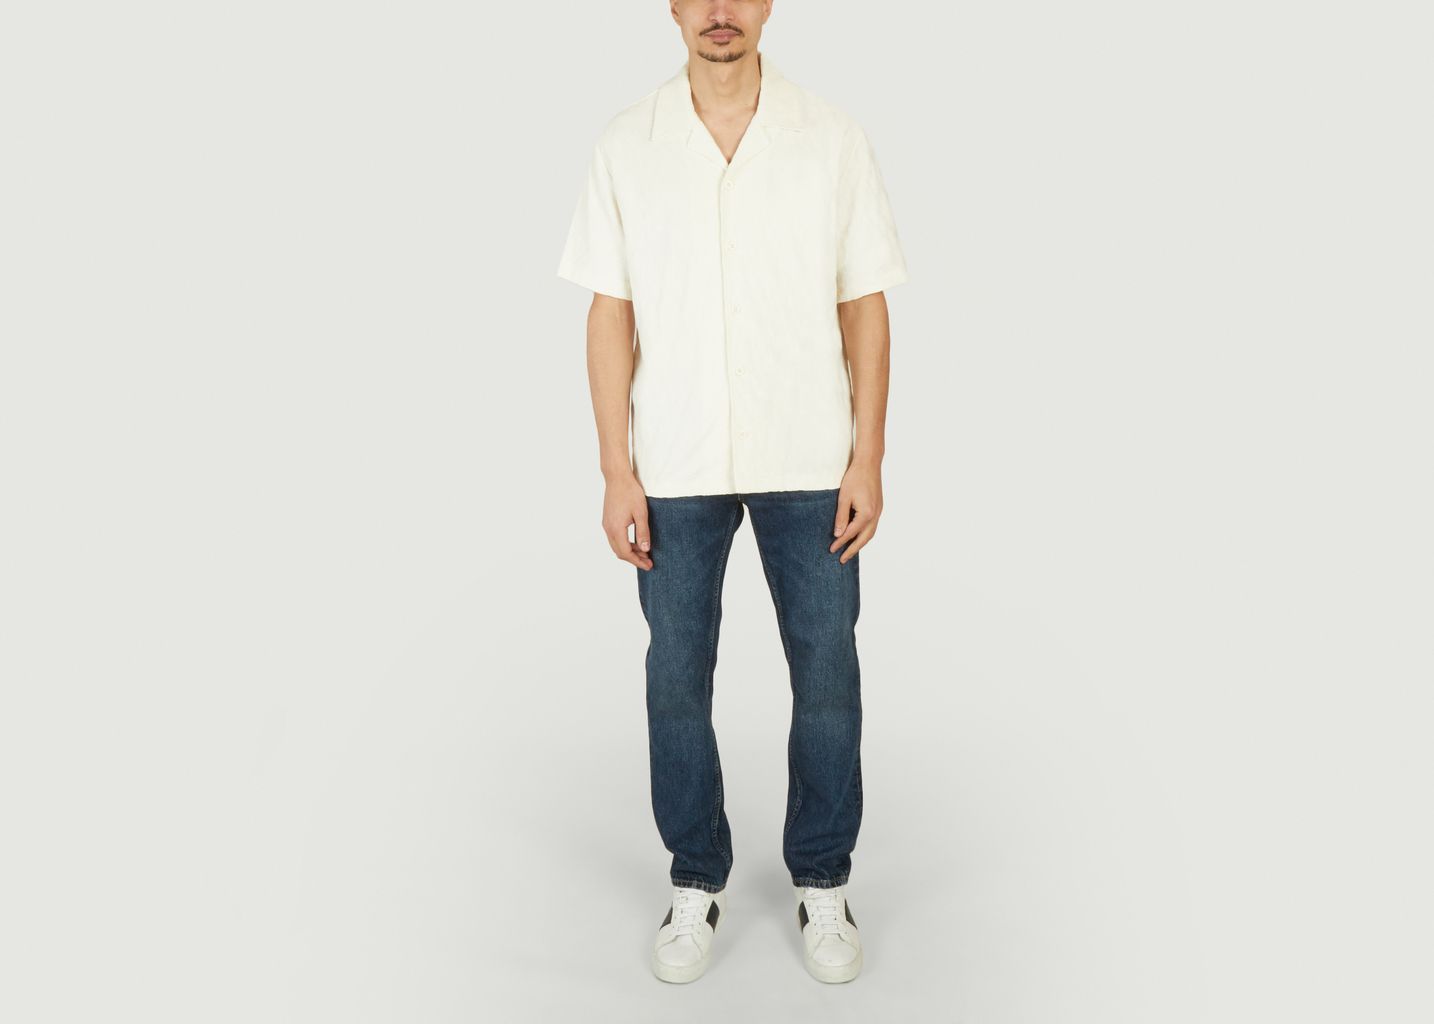 Relaxed fit textured jacquard blouse - Gant